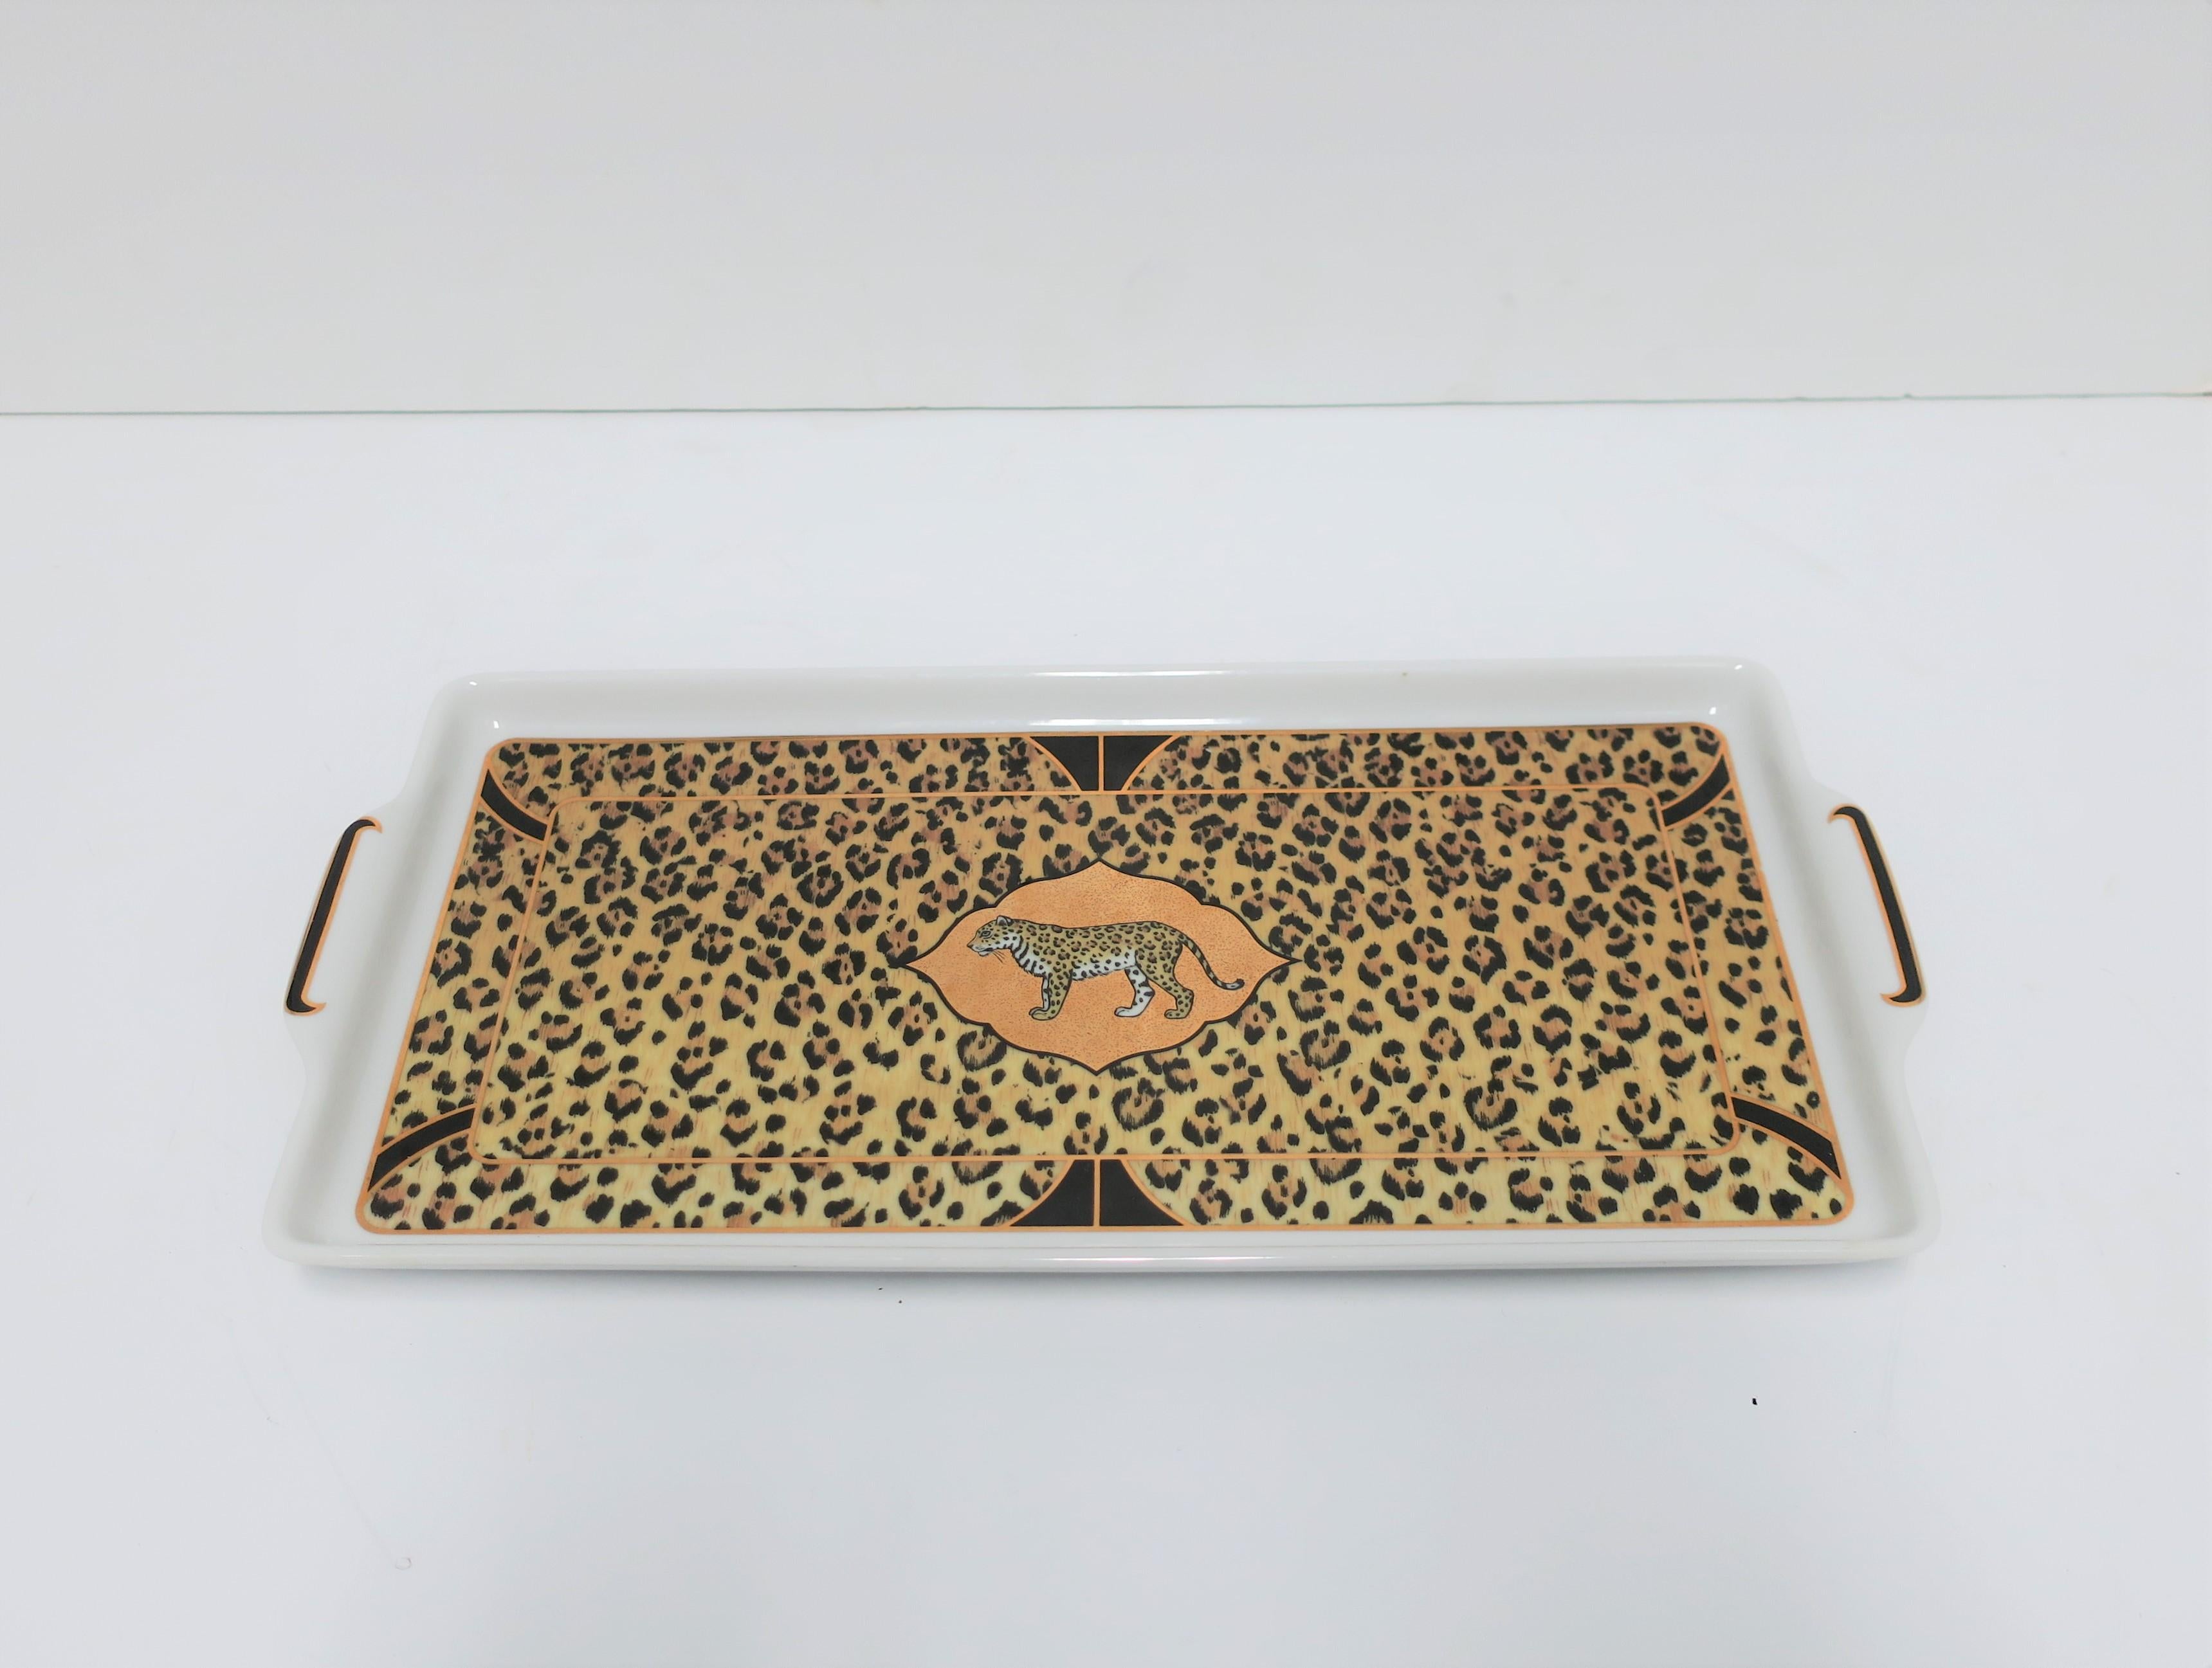 American Lynn Chase Leopard Cat Porcelain Serving Tray in Black and Gold, circa 1990s For Sale